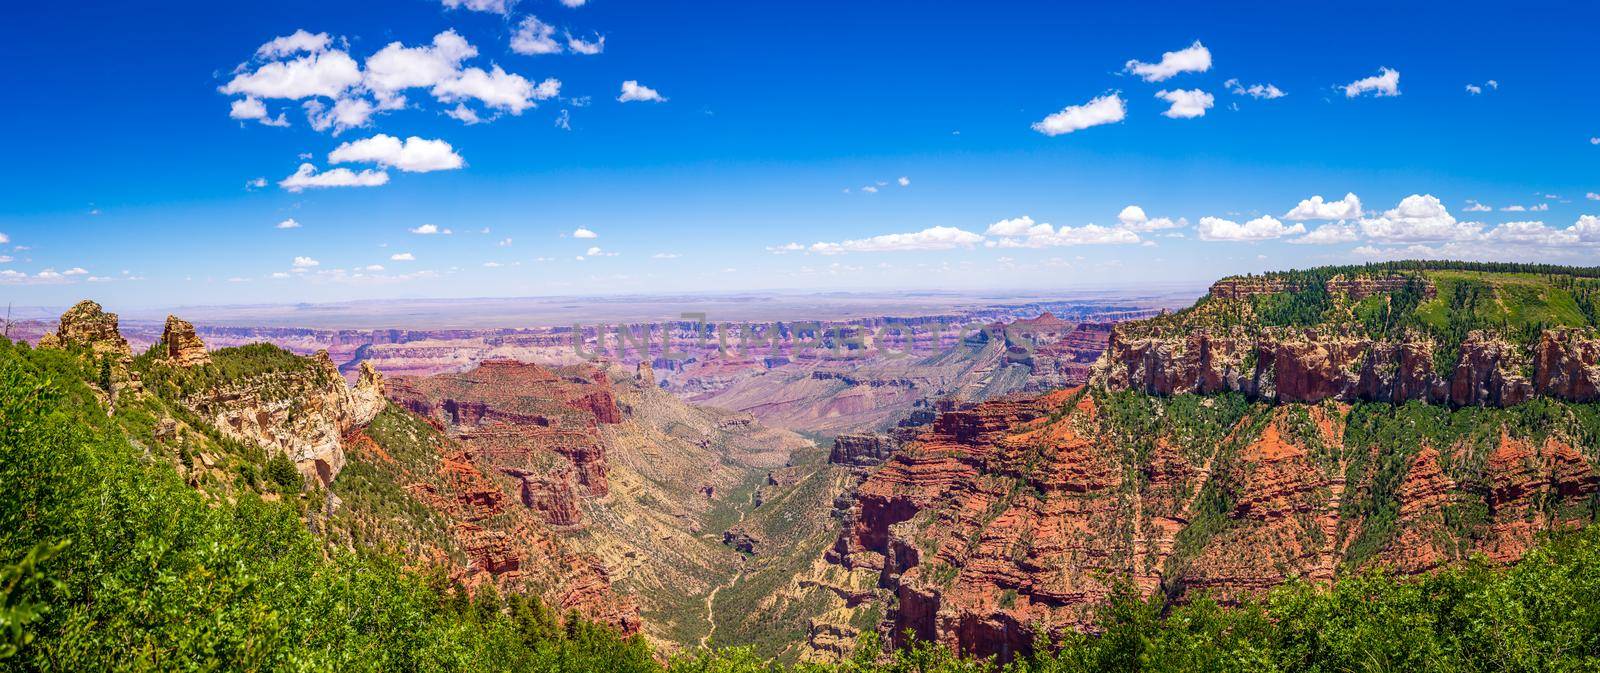 Grand Canyon National Park by gepeng